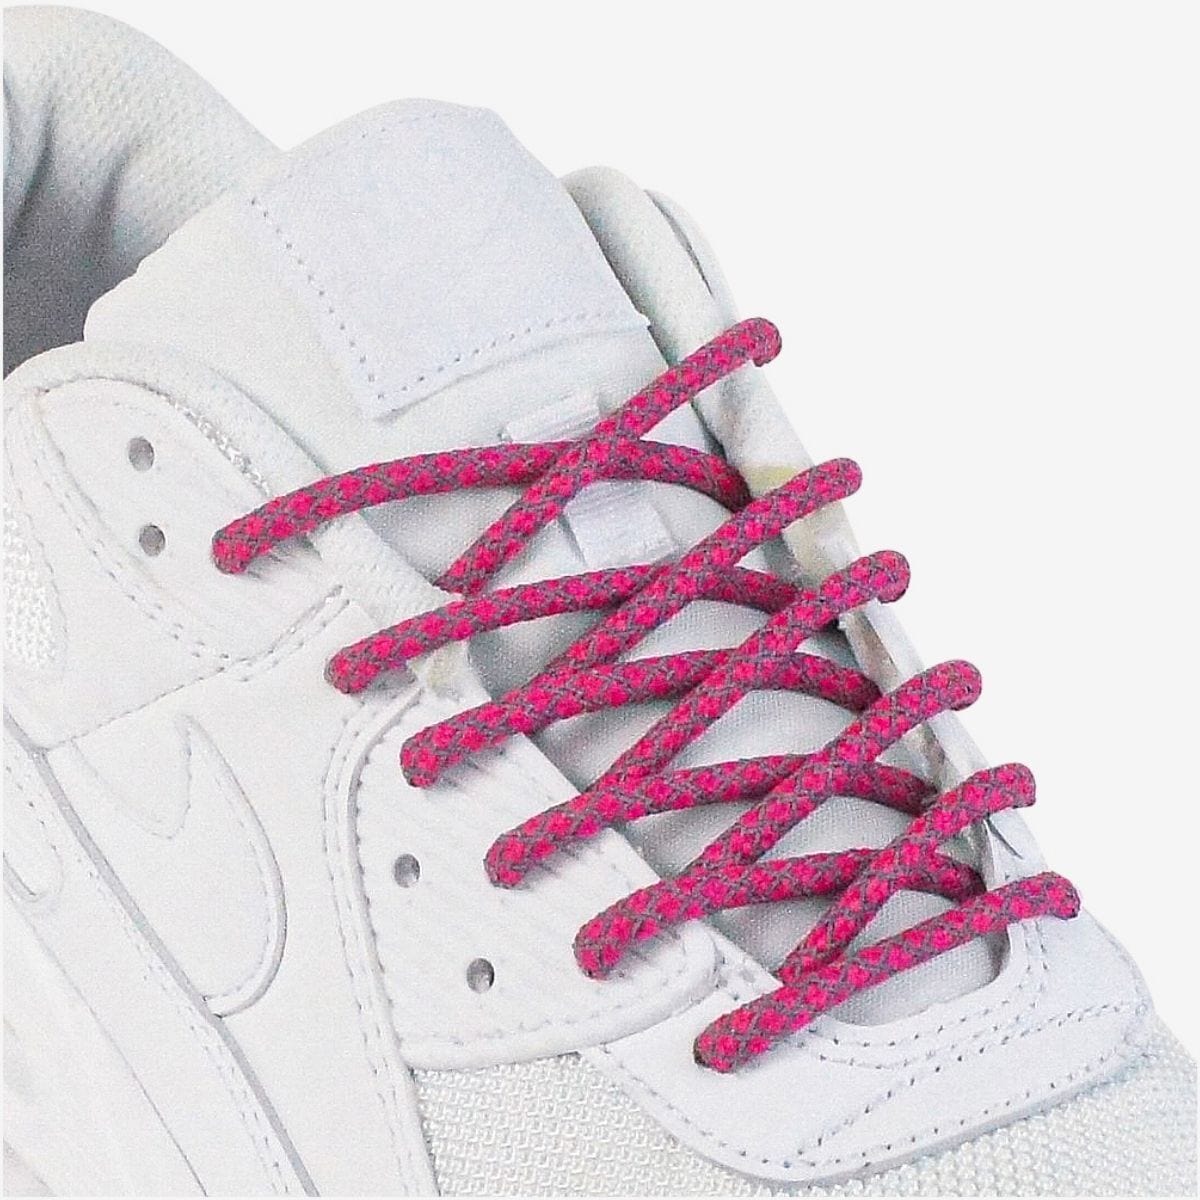 custom-color-shoelaces-on-white-sneakers-with-reflective-rose-pink-laces